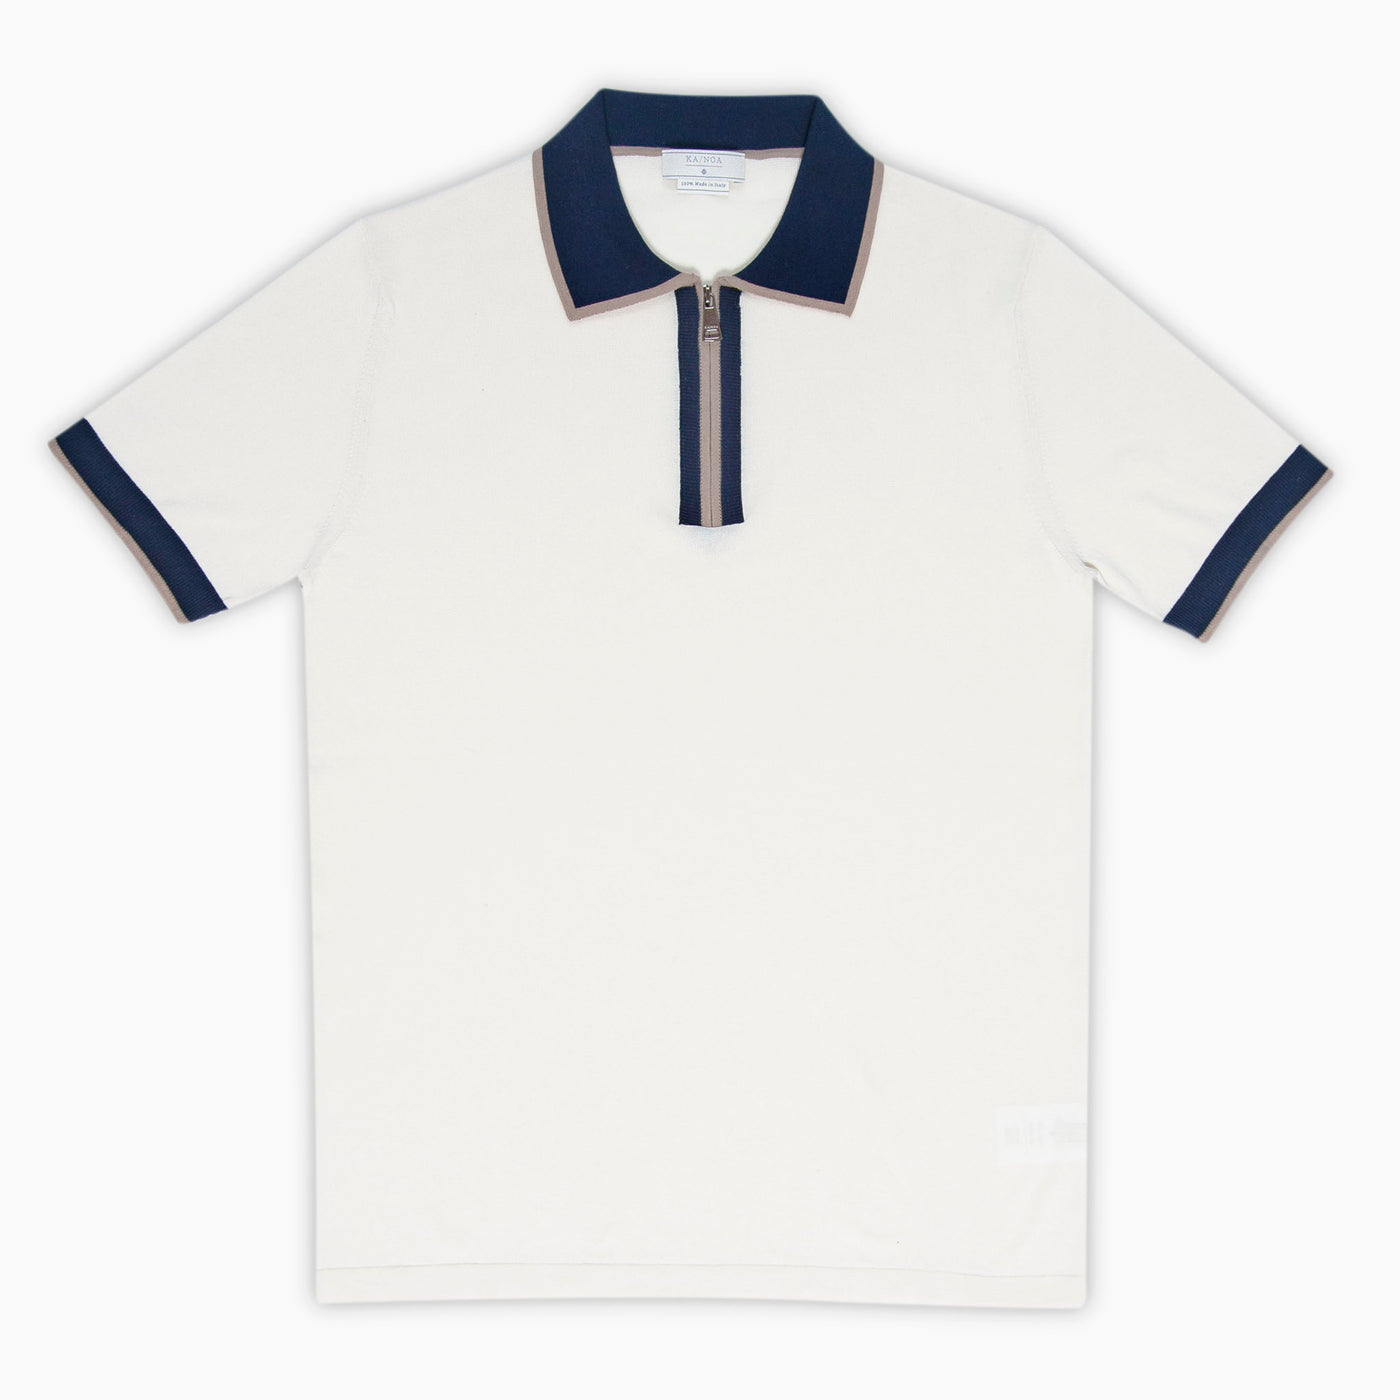 Canut short-sleeved knitted zipped polo in compact cotton